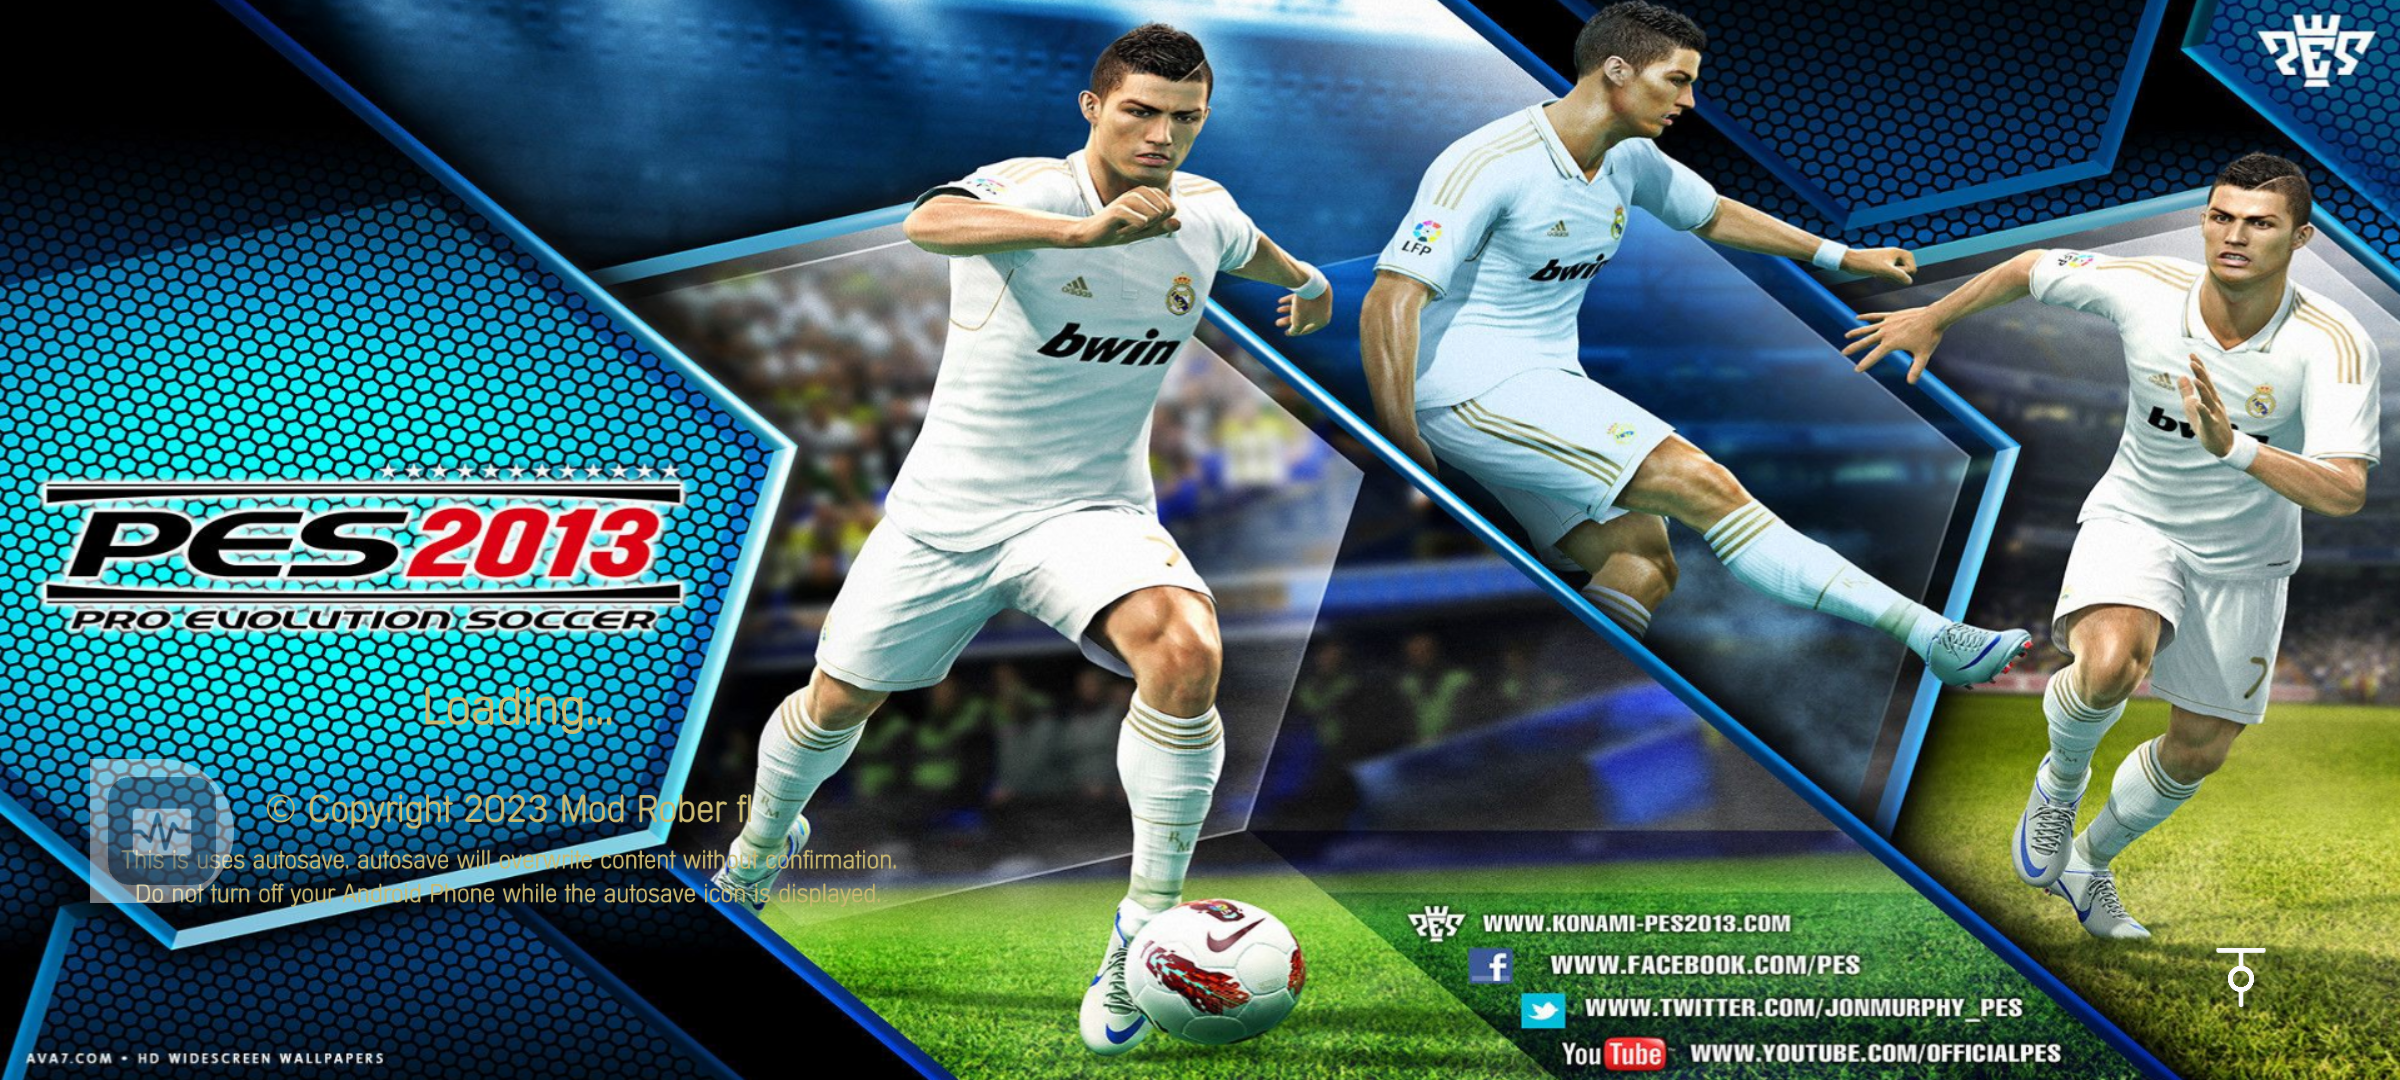 PES 2013 MOBILE MOD 24 PATCH FIFA 16 ANDROID